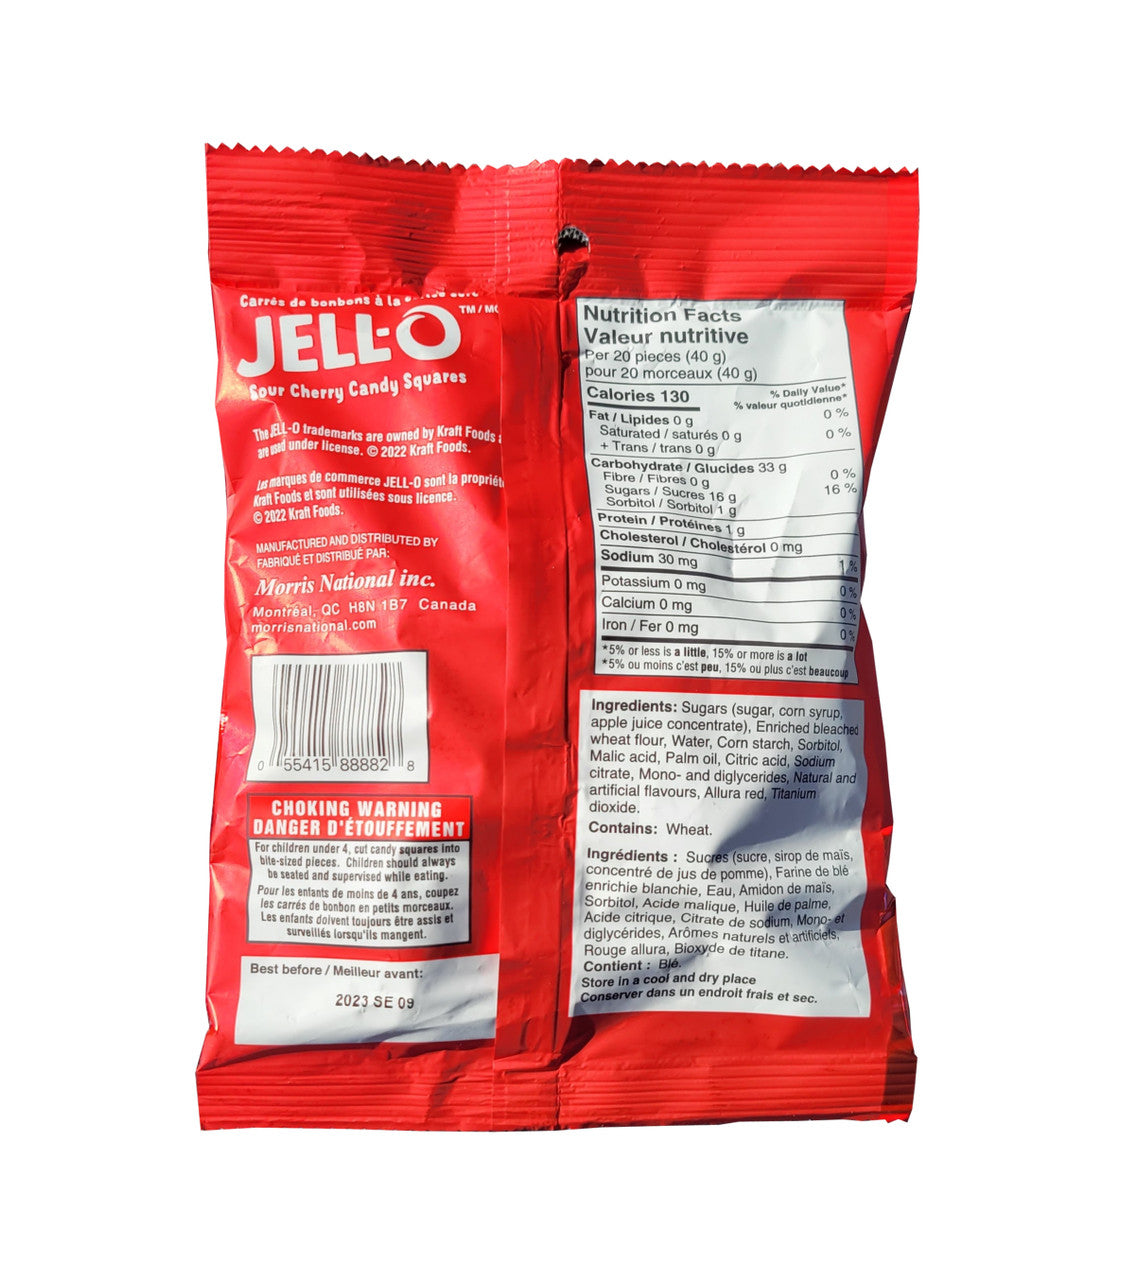 Jell-O Sour Cherry Candy Squares, 127g/4.5oz. (Imported from Canada)